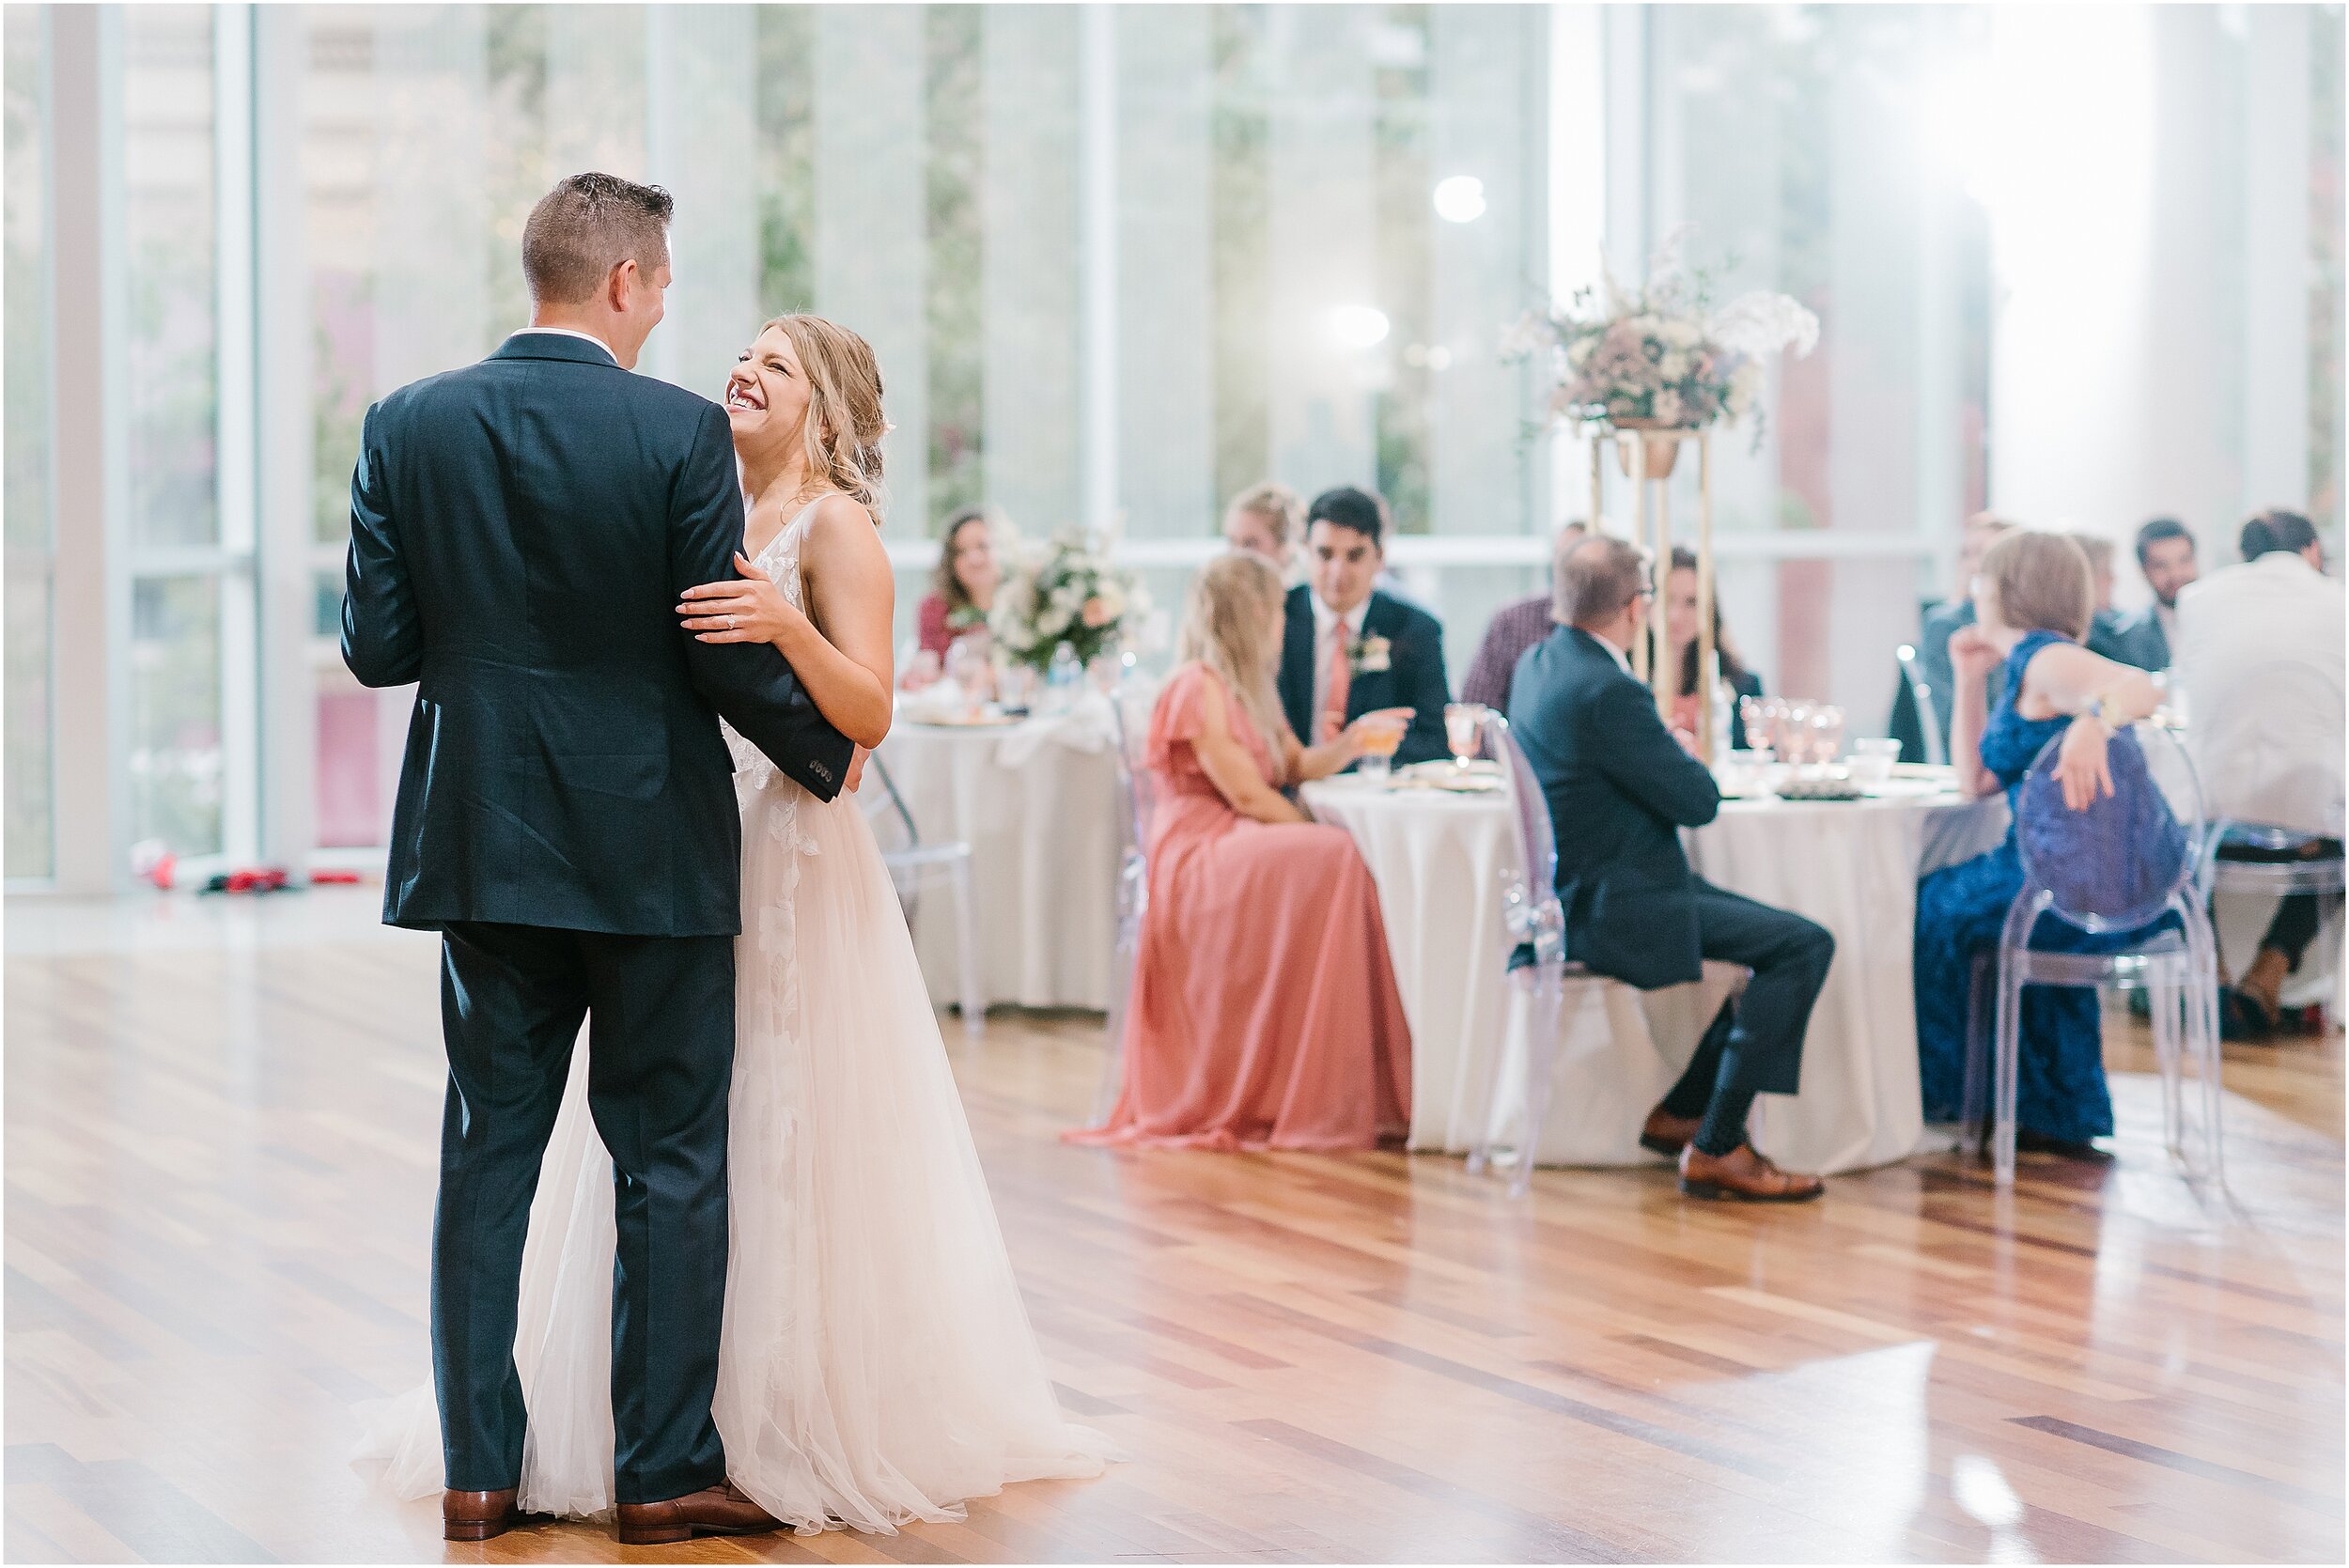 Rebecca Shehorn Photography Colleen and Kyle Inn at Irwin Gardens Wedding-917_The Commons Columbus Inn at Irwin Garden Indianapolis Wedding Photographer.jpg